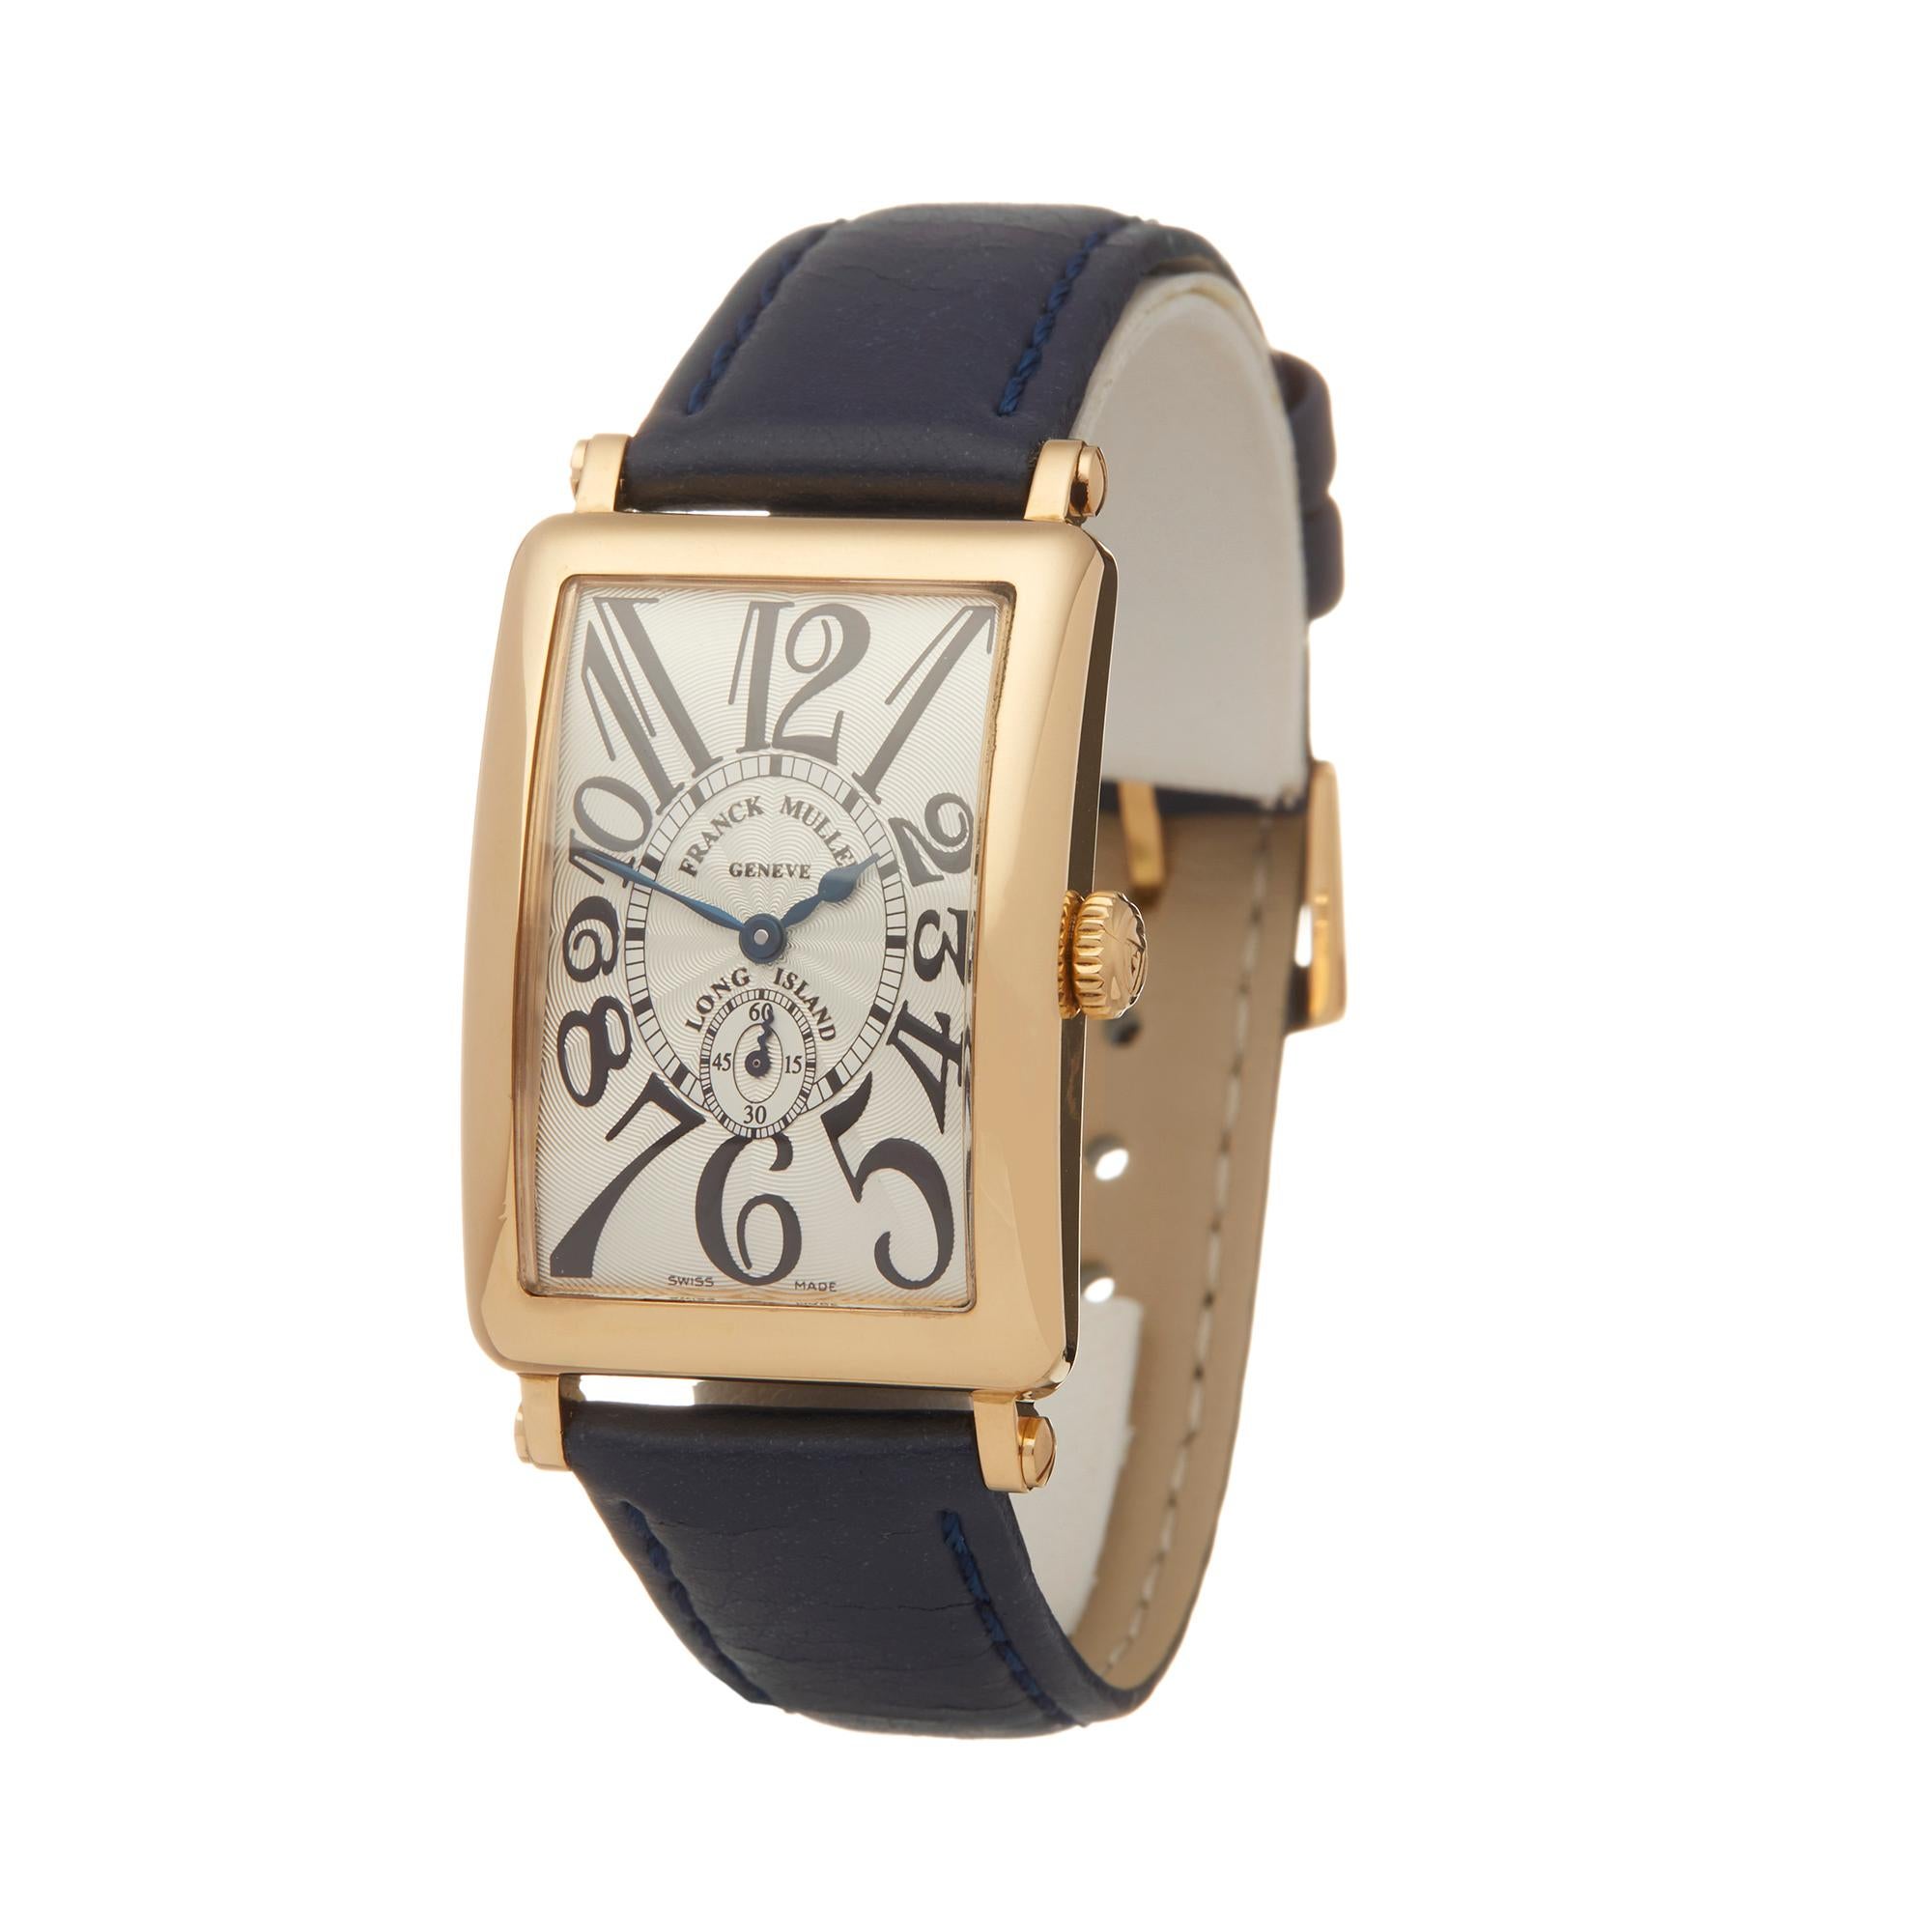 Ref: W5802
Manufacturer: Franck Muller
Model: Long Island
Model Ref: 950 56
Age: Circa 2000's
Gender: Unisex
Complete With: Box Only
Dial: Silver Arabic
Glass: Sapphire Crystal
Movement: Quartz
Water Resistance: To Manufacturers Specifications
Case: